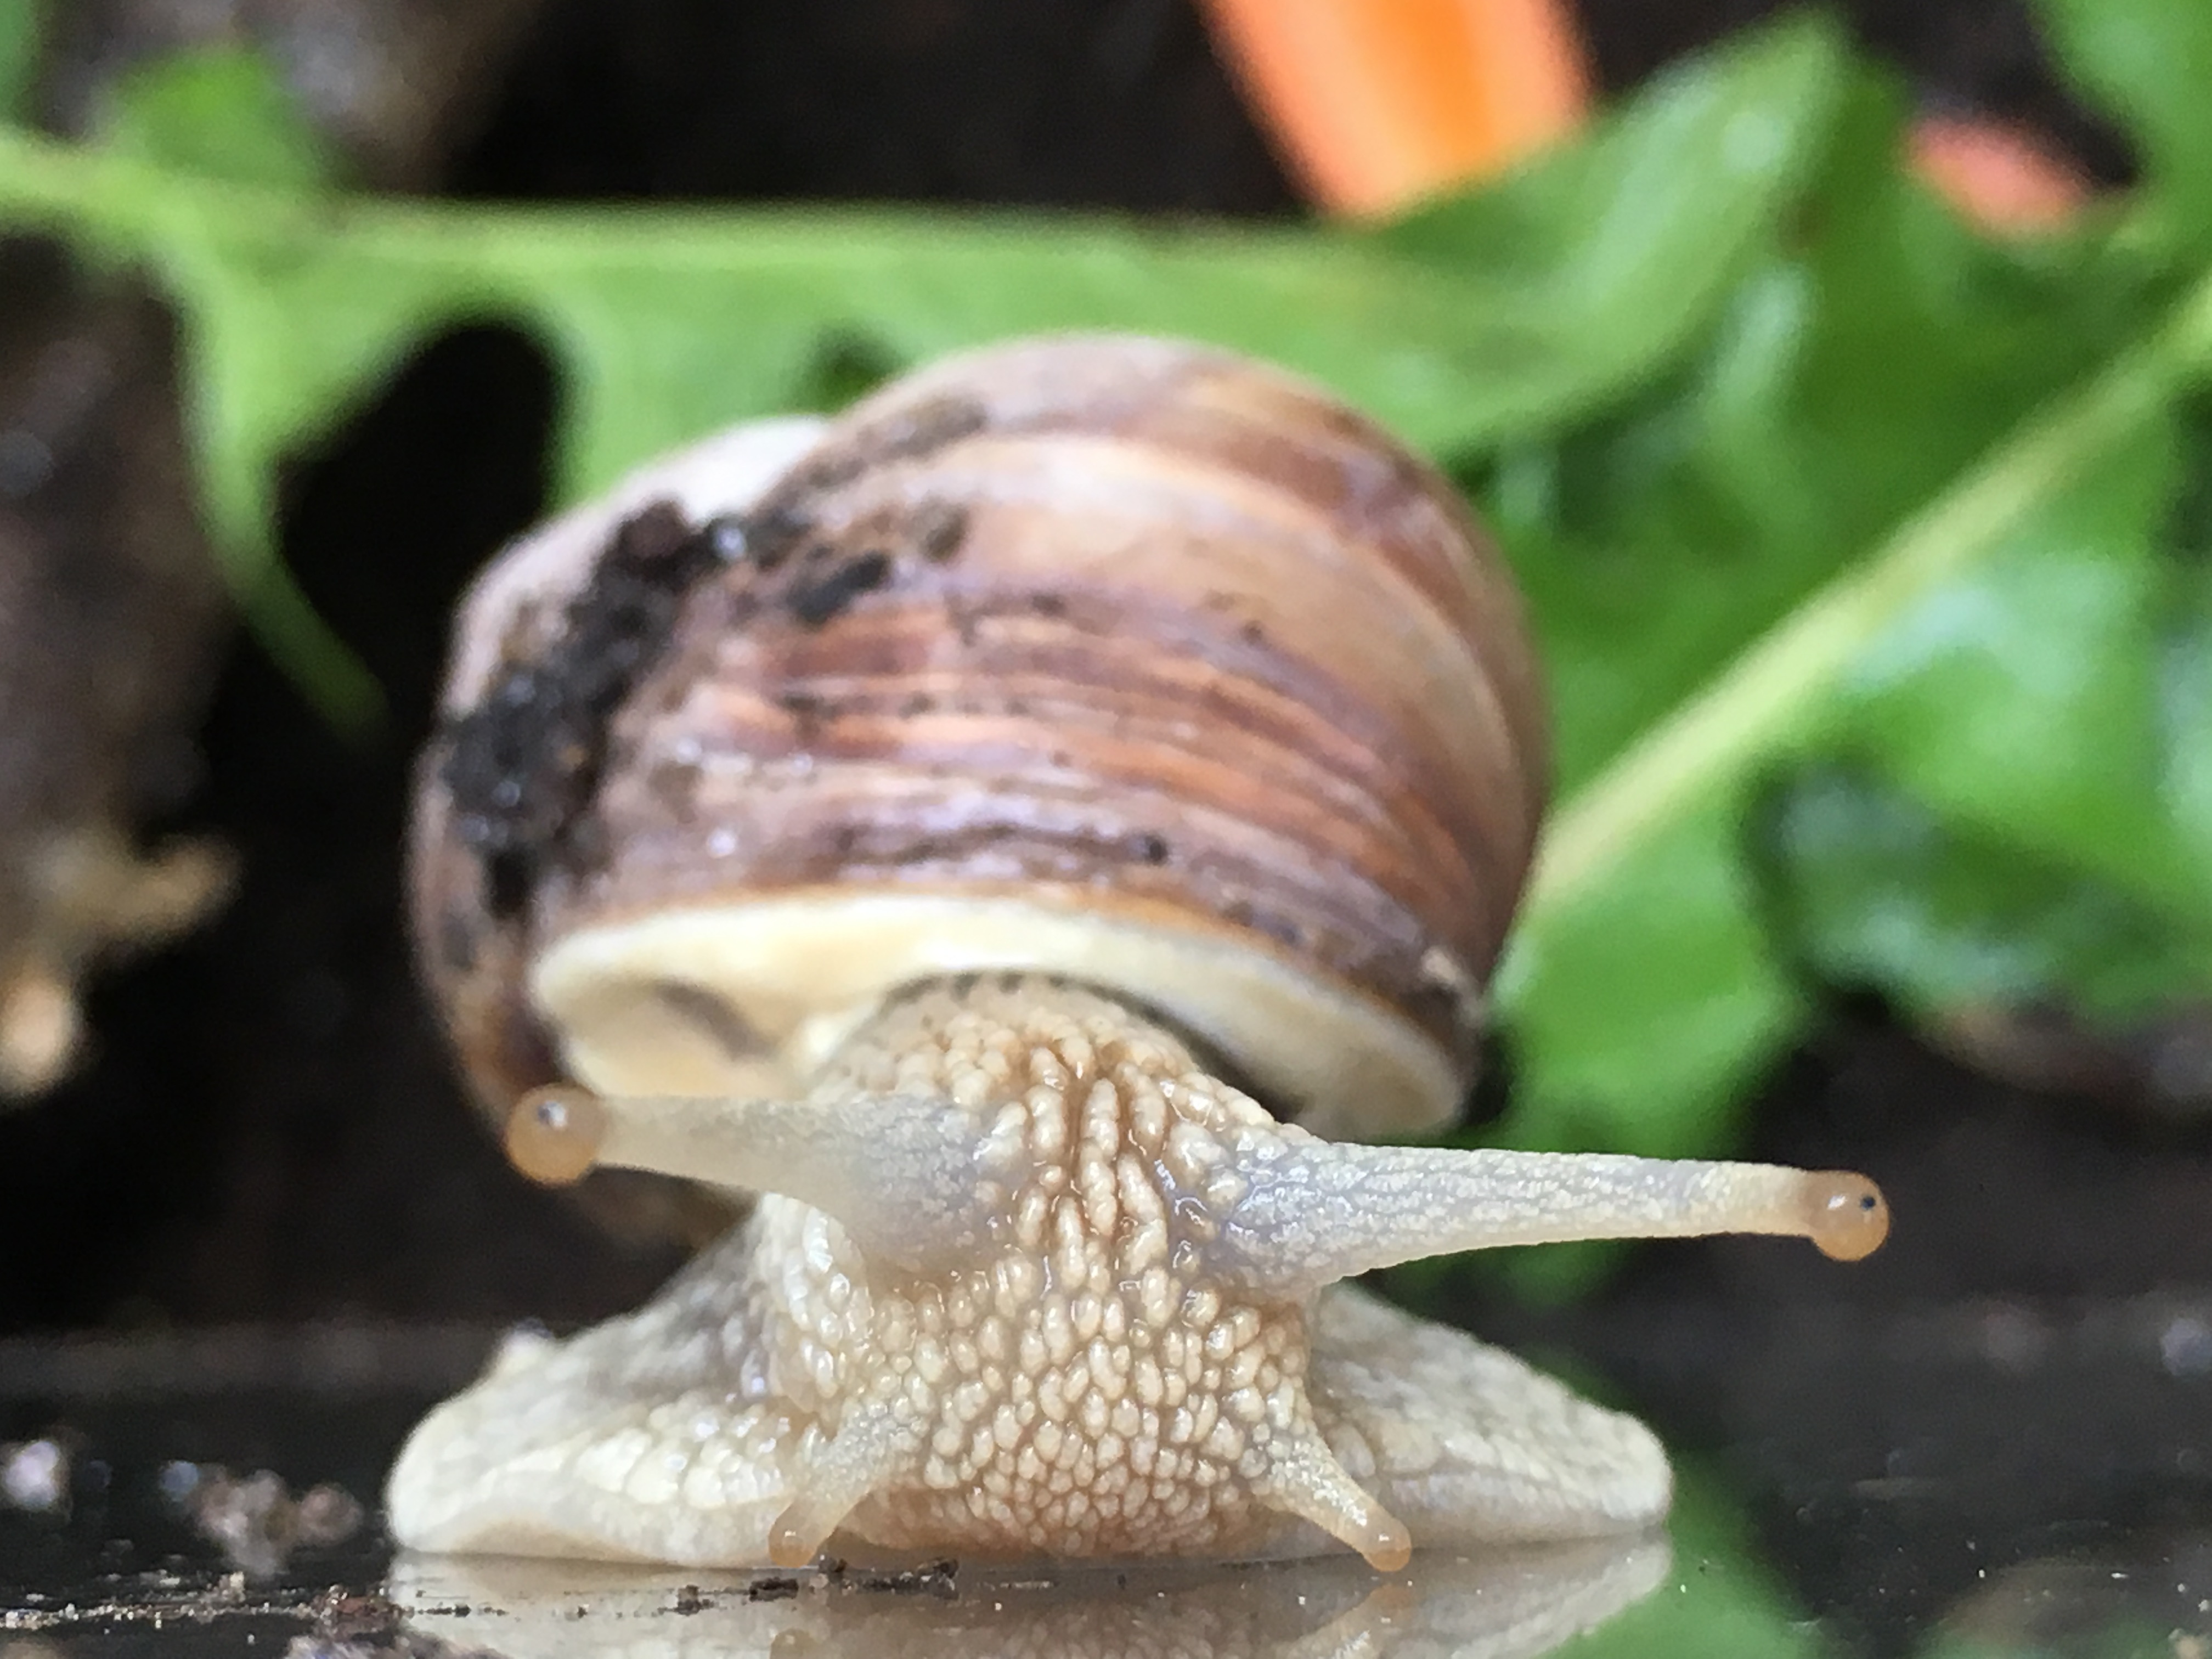 How can you tell if a snail is quiet?